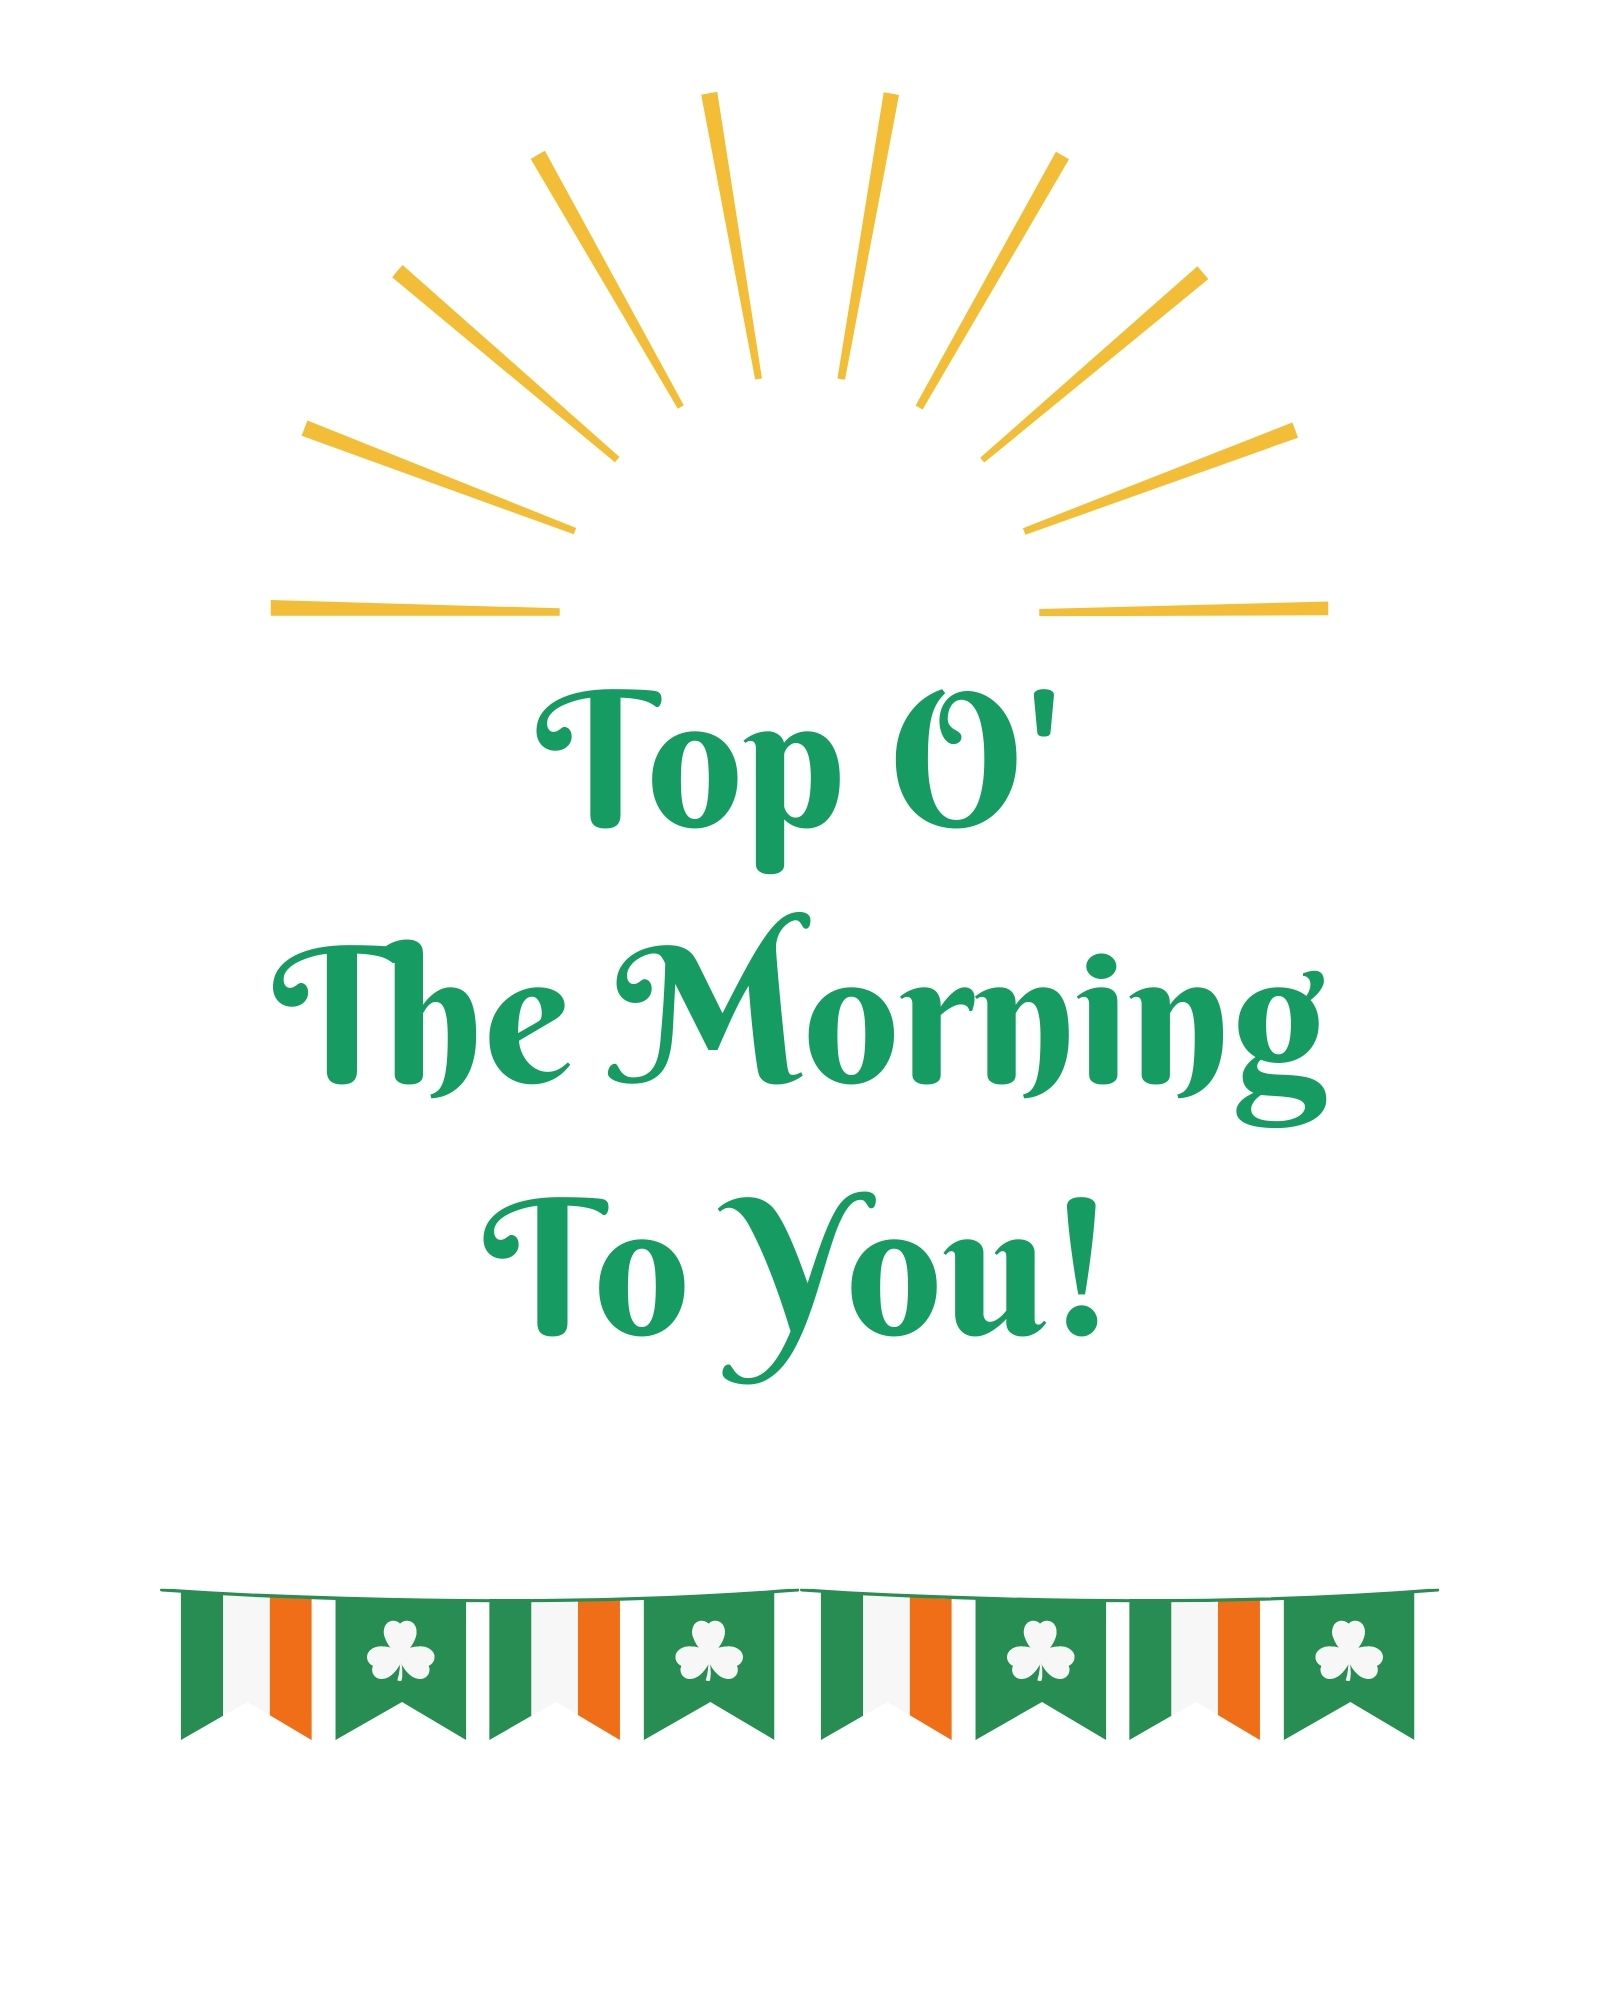 Top O' The Morning To You